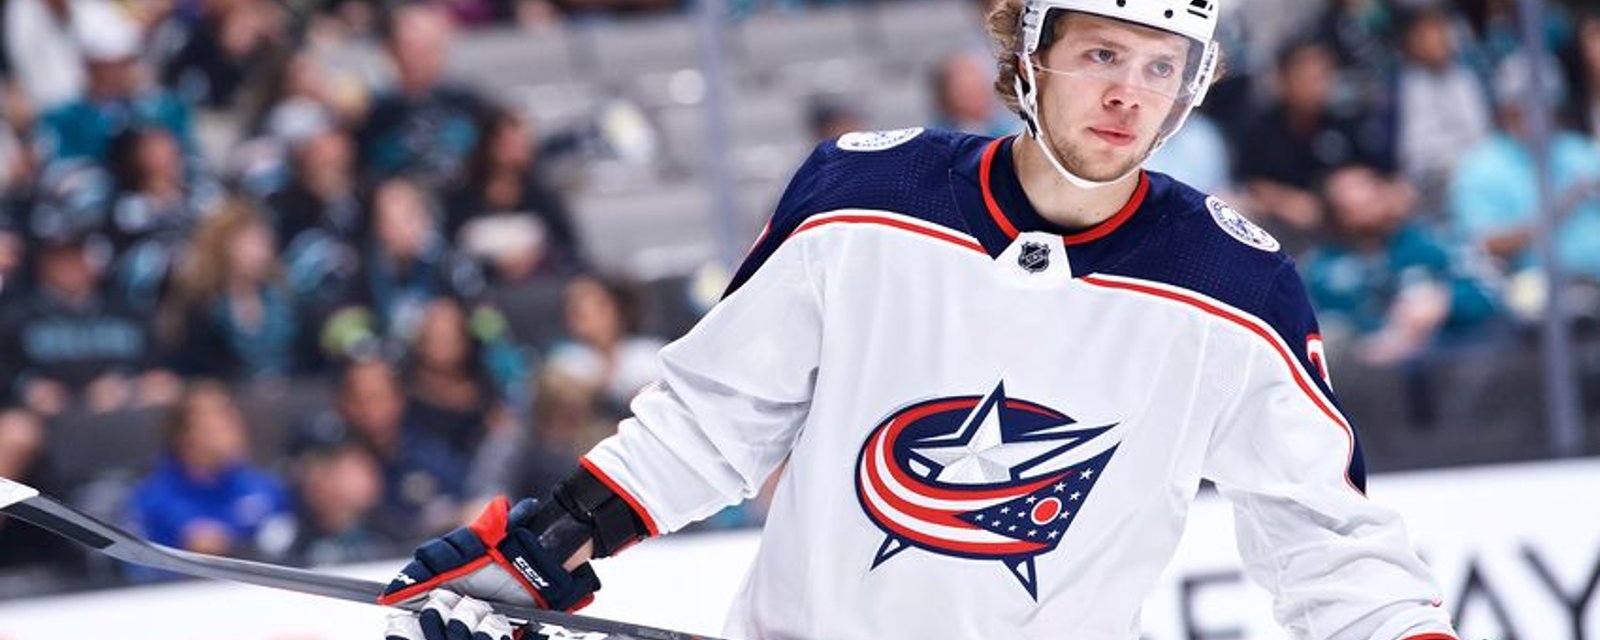 Breaking: Panarin pulled out of the lineup for tonight's game as trade deadline looms 